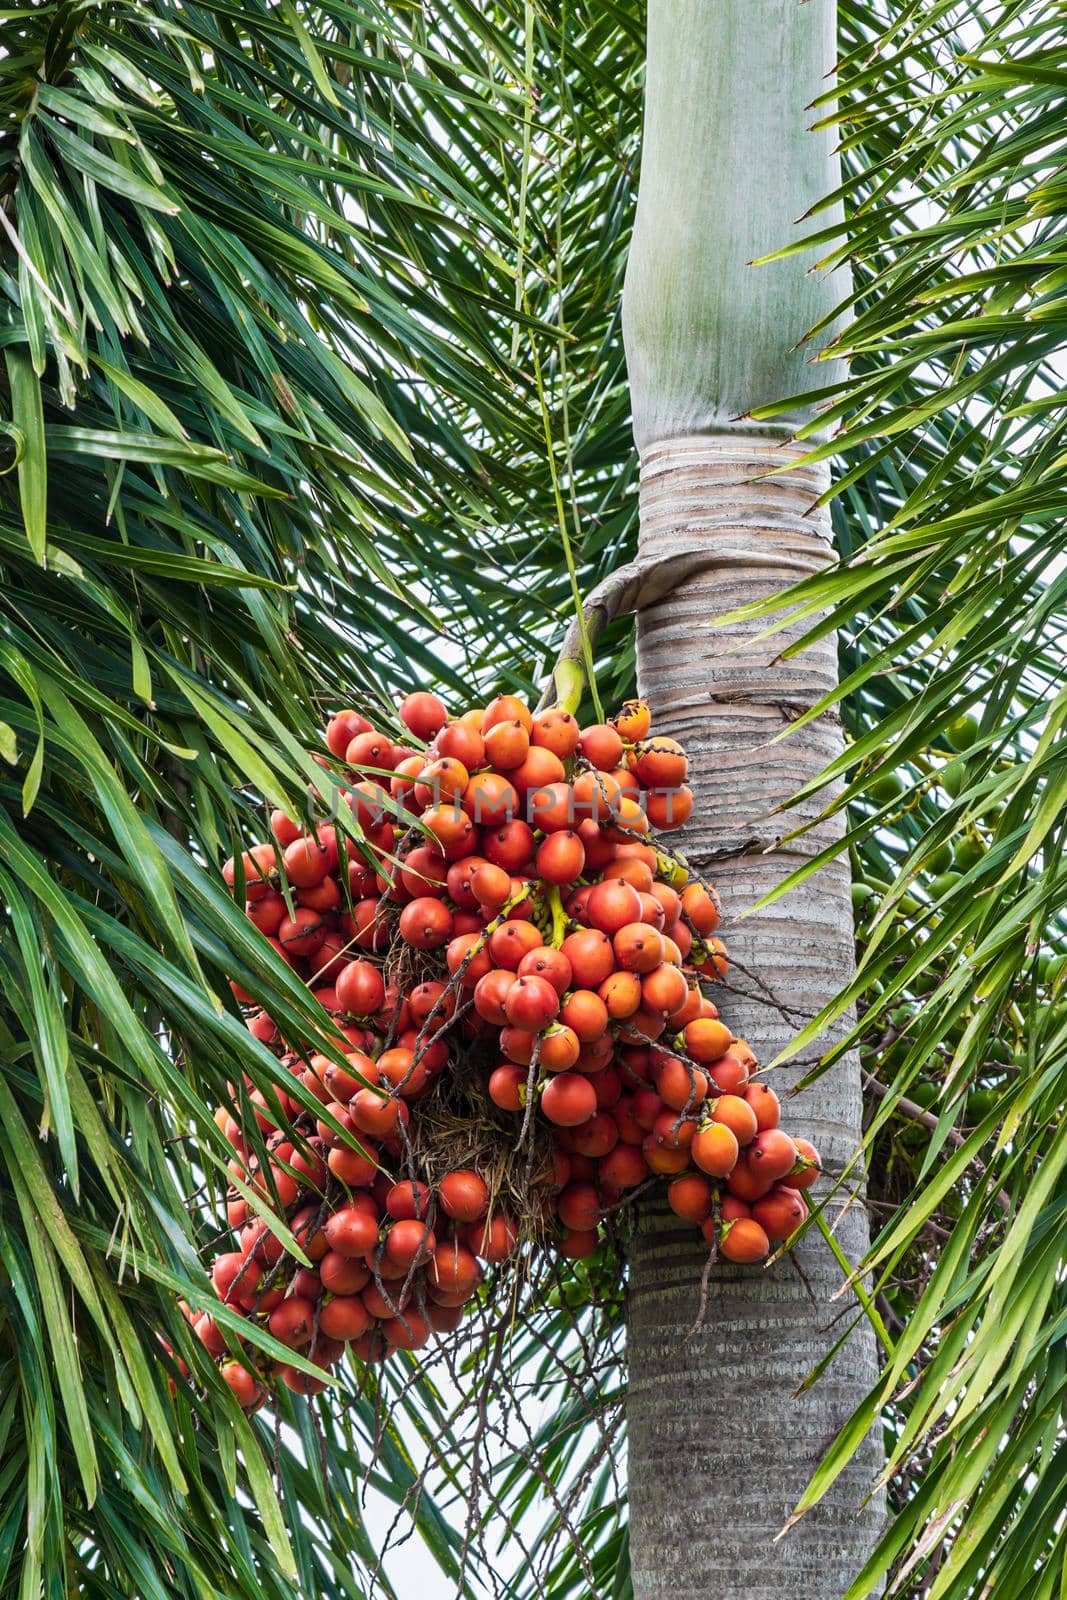 Areca catechu (Areca nut palm, Betel Nuts) All bunch into large clustered, hanging down. by Gamjai